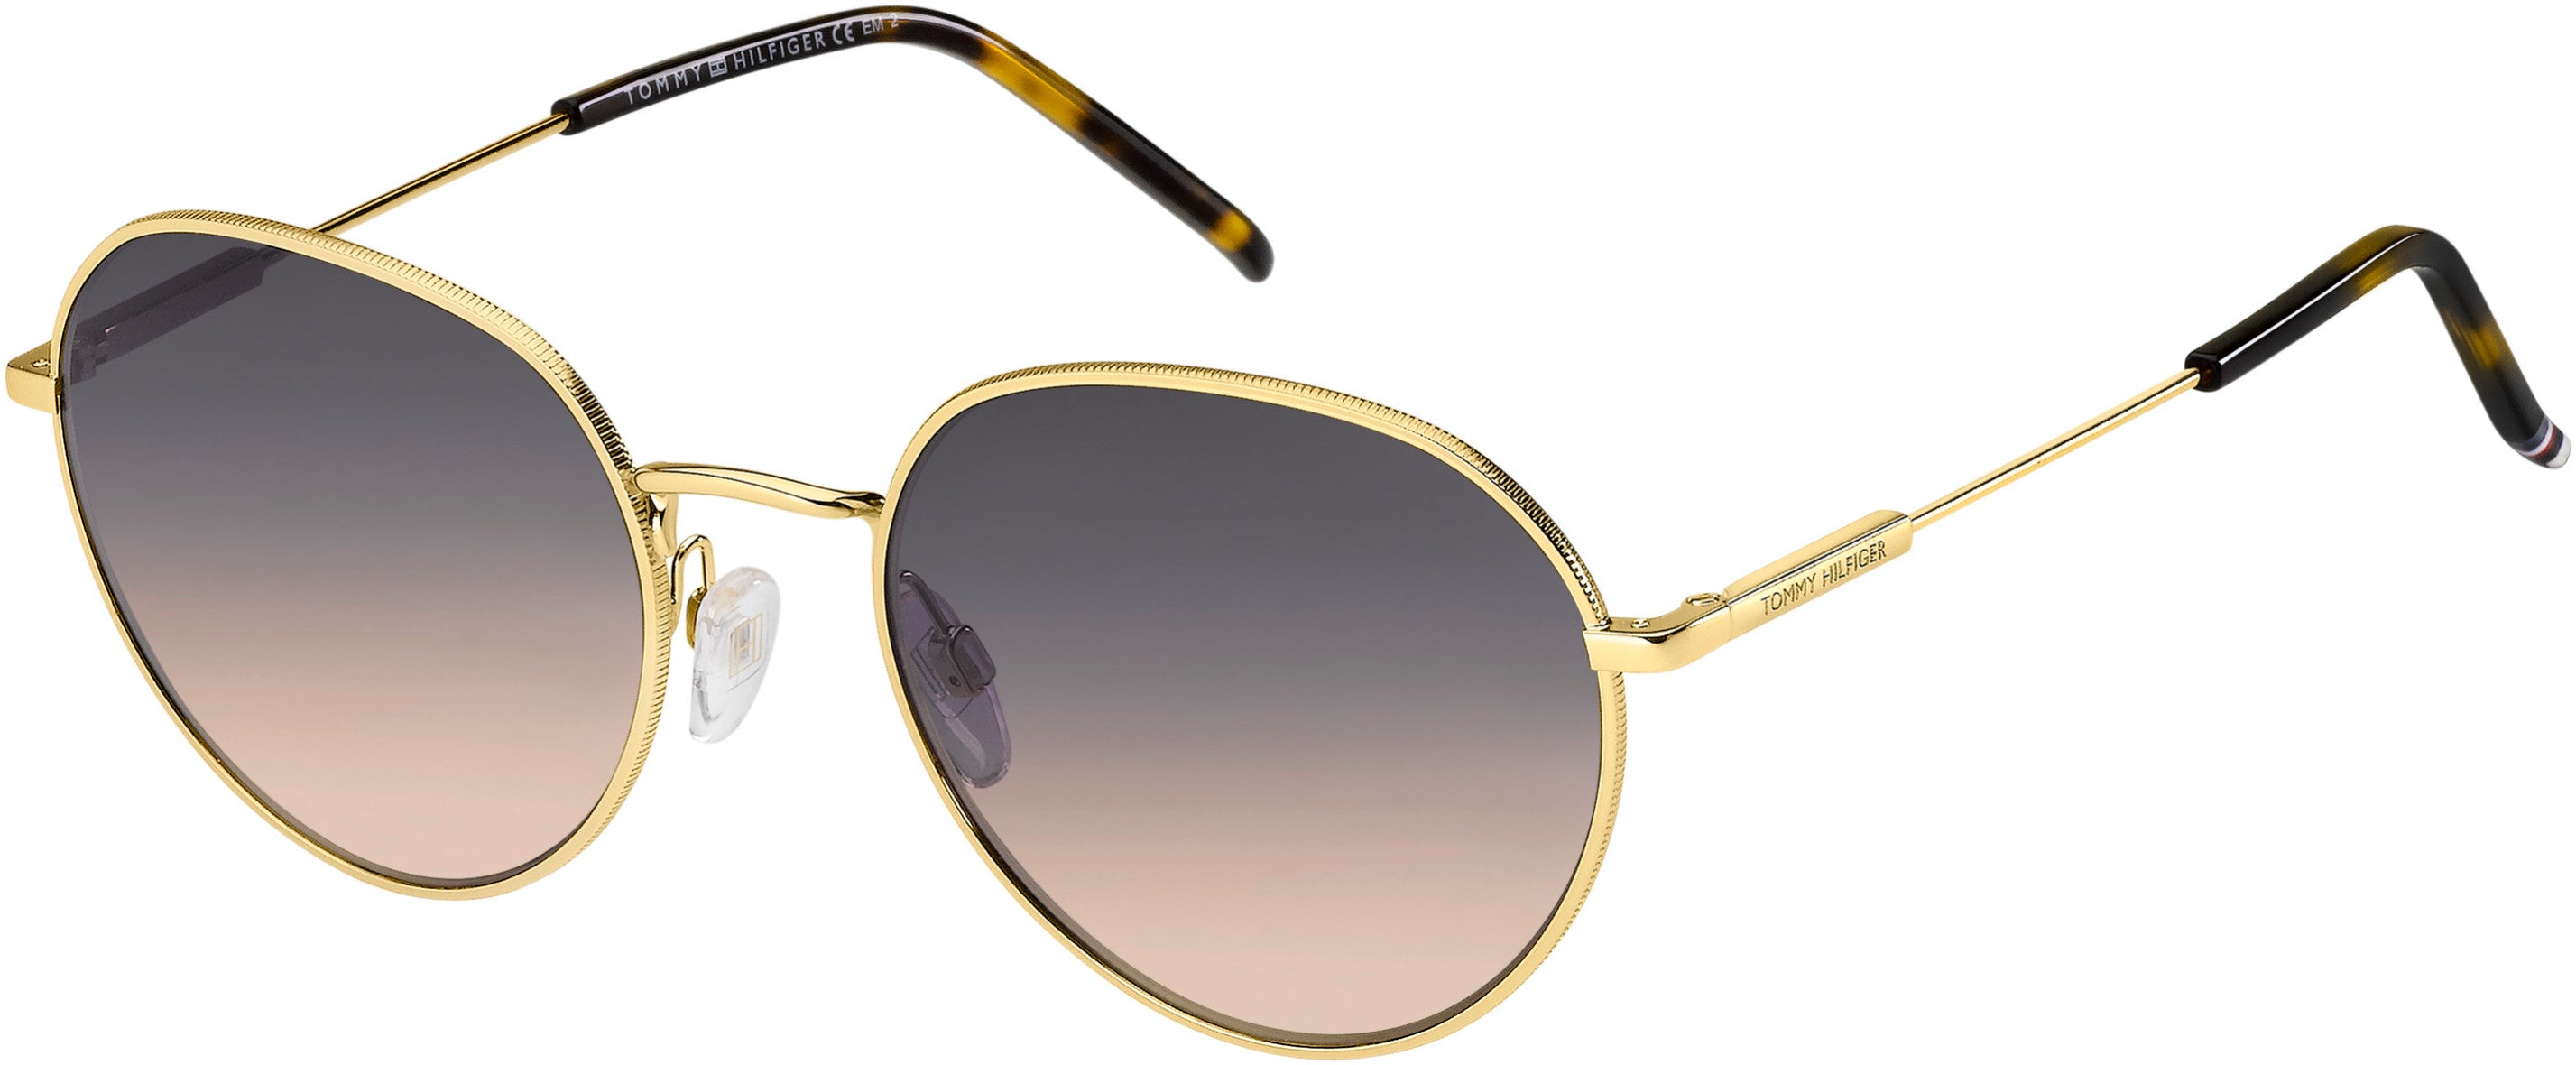 Tommy Hilfiger T. Hilfiger 1711/S Oval Modified Sunglasses 001Q-001Q  Gold Brown (GA Brown Shaded Ochre)